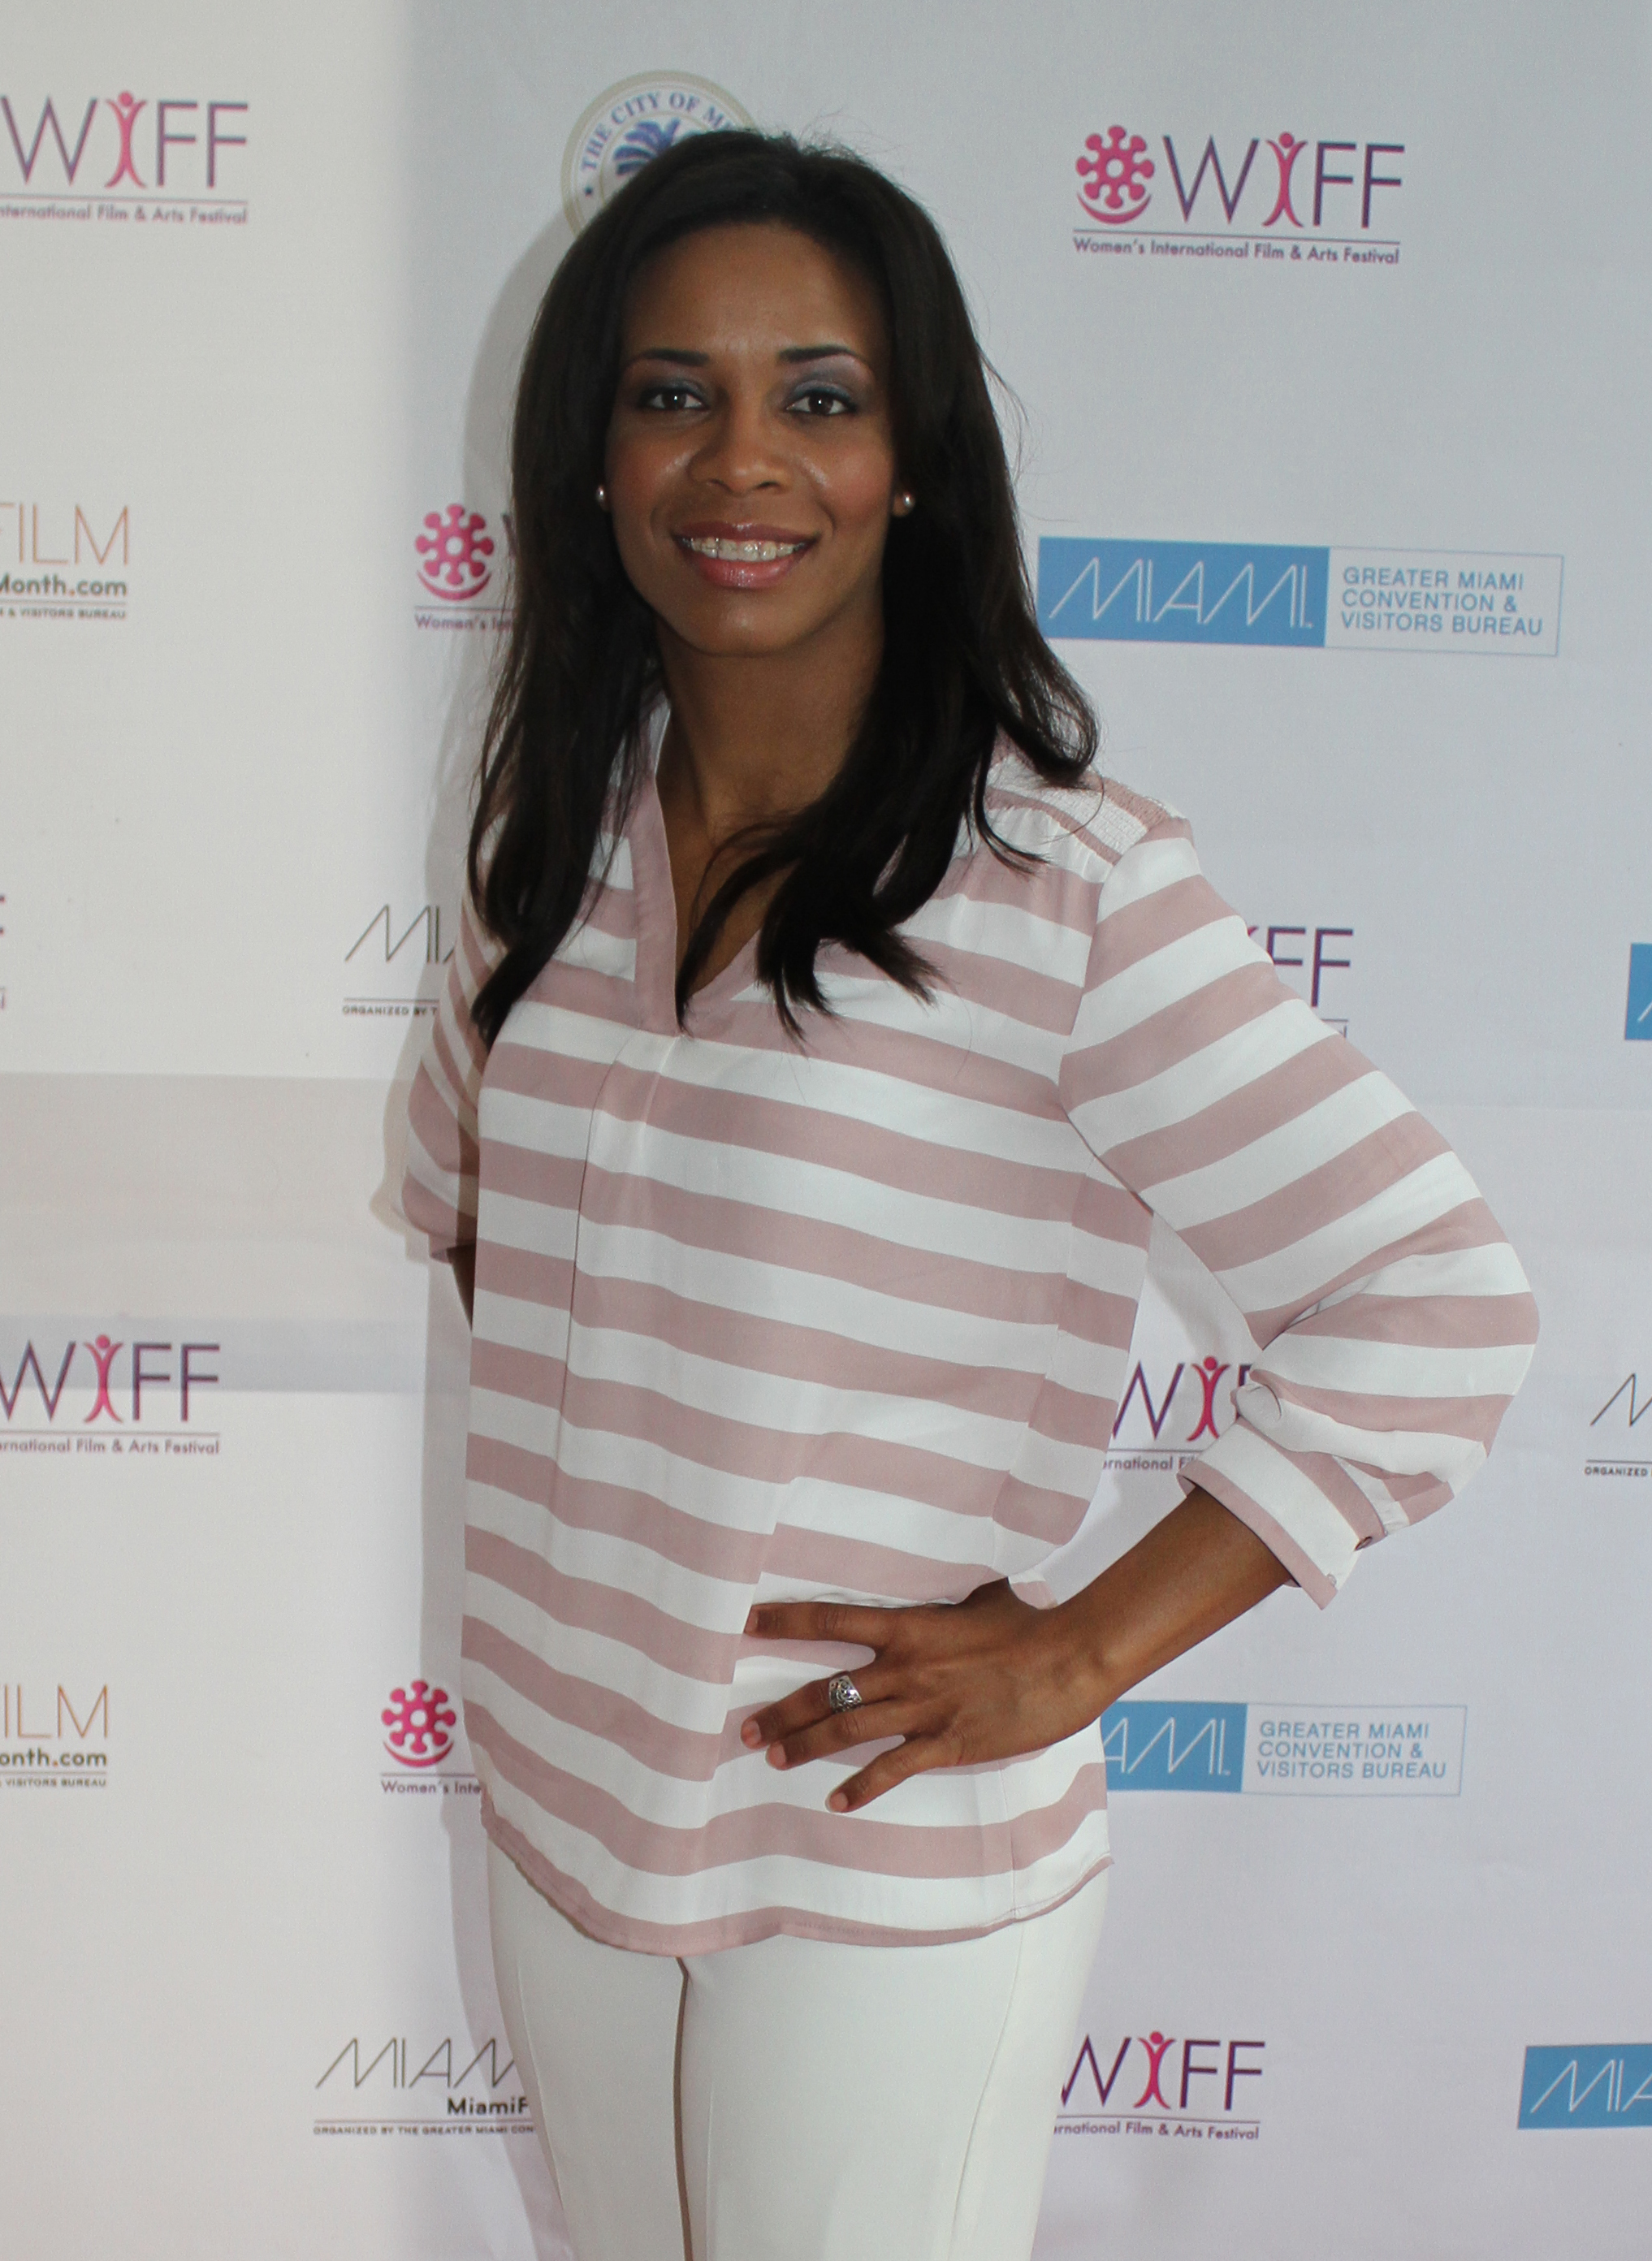 Dreka Shevon at the Women's International Film Festival in Miami where not only did her film, the Companion walked away with an award, by the hot young writer/producer also shared her wisdom while speaking on the Domestic Violence Panel